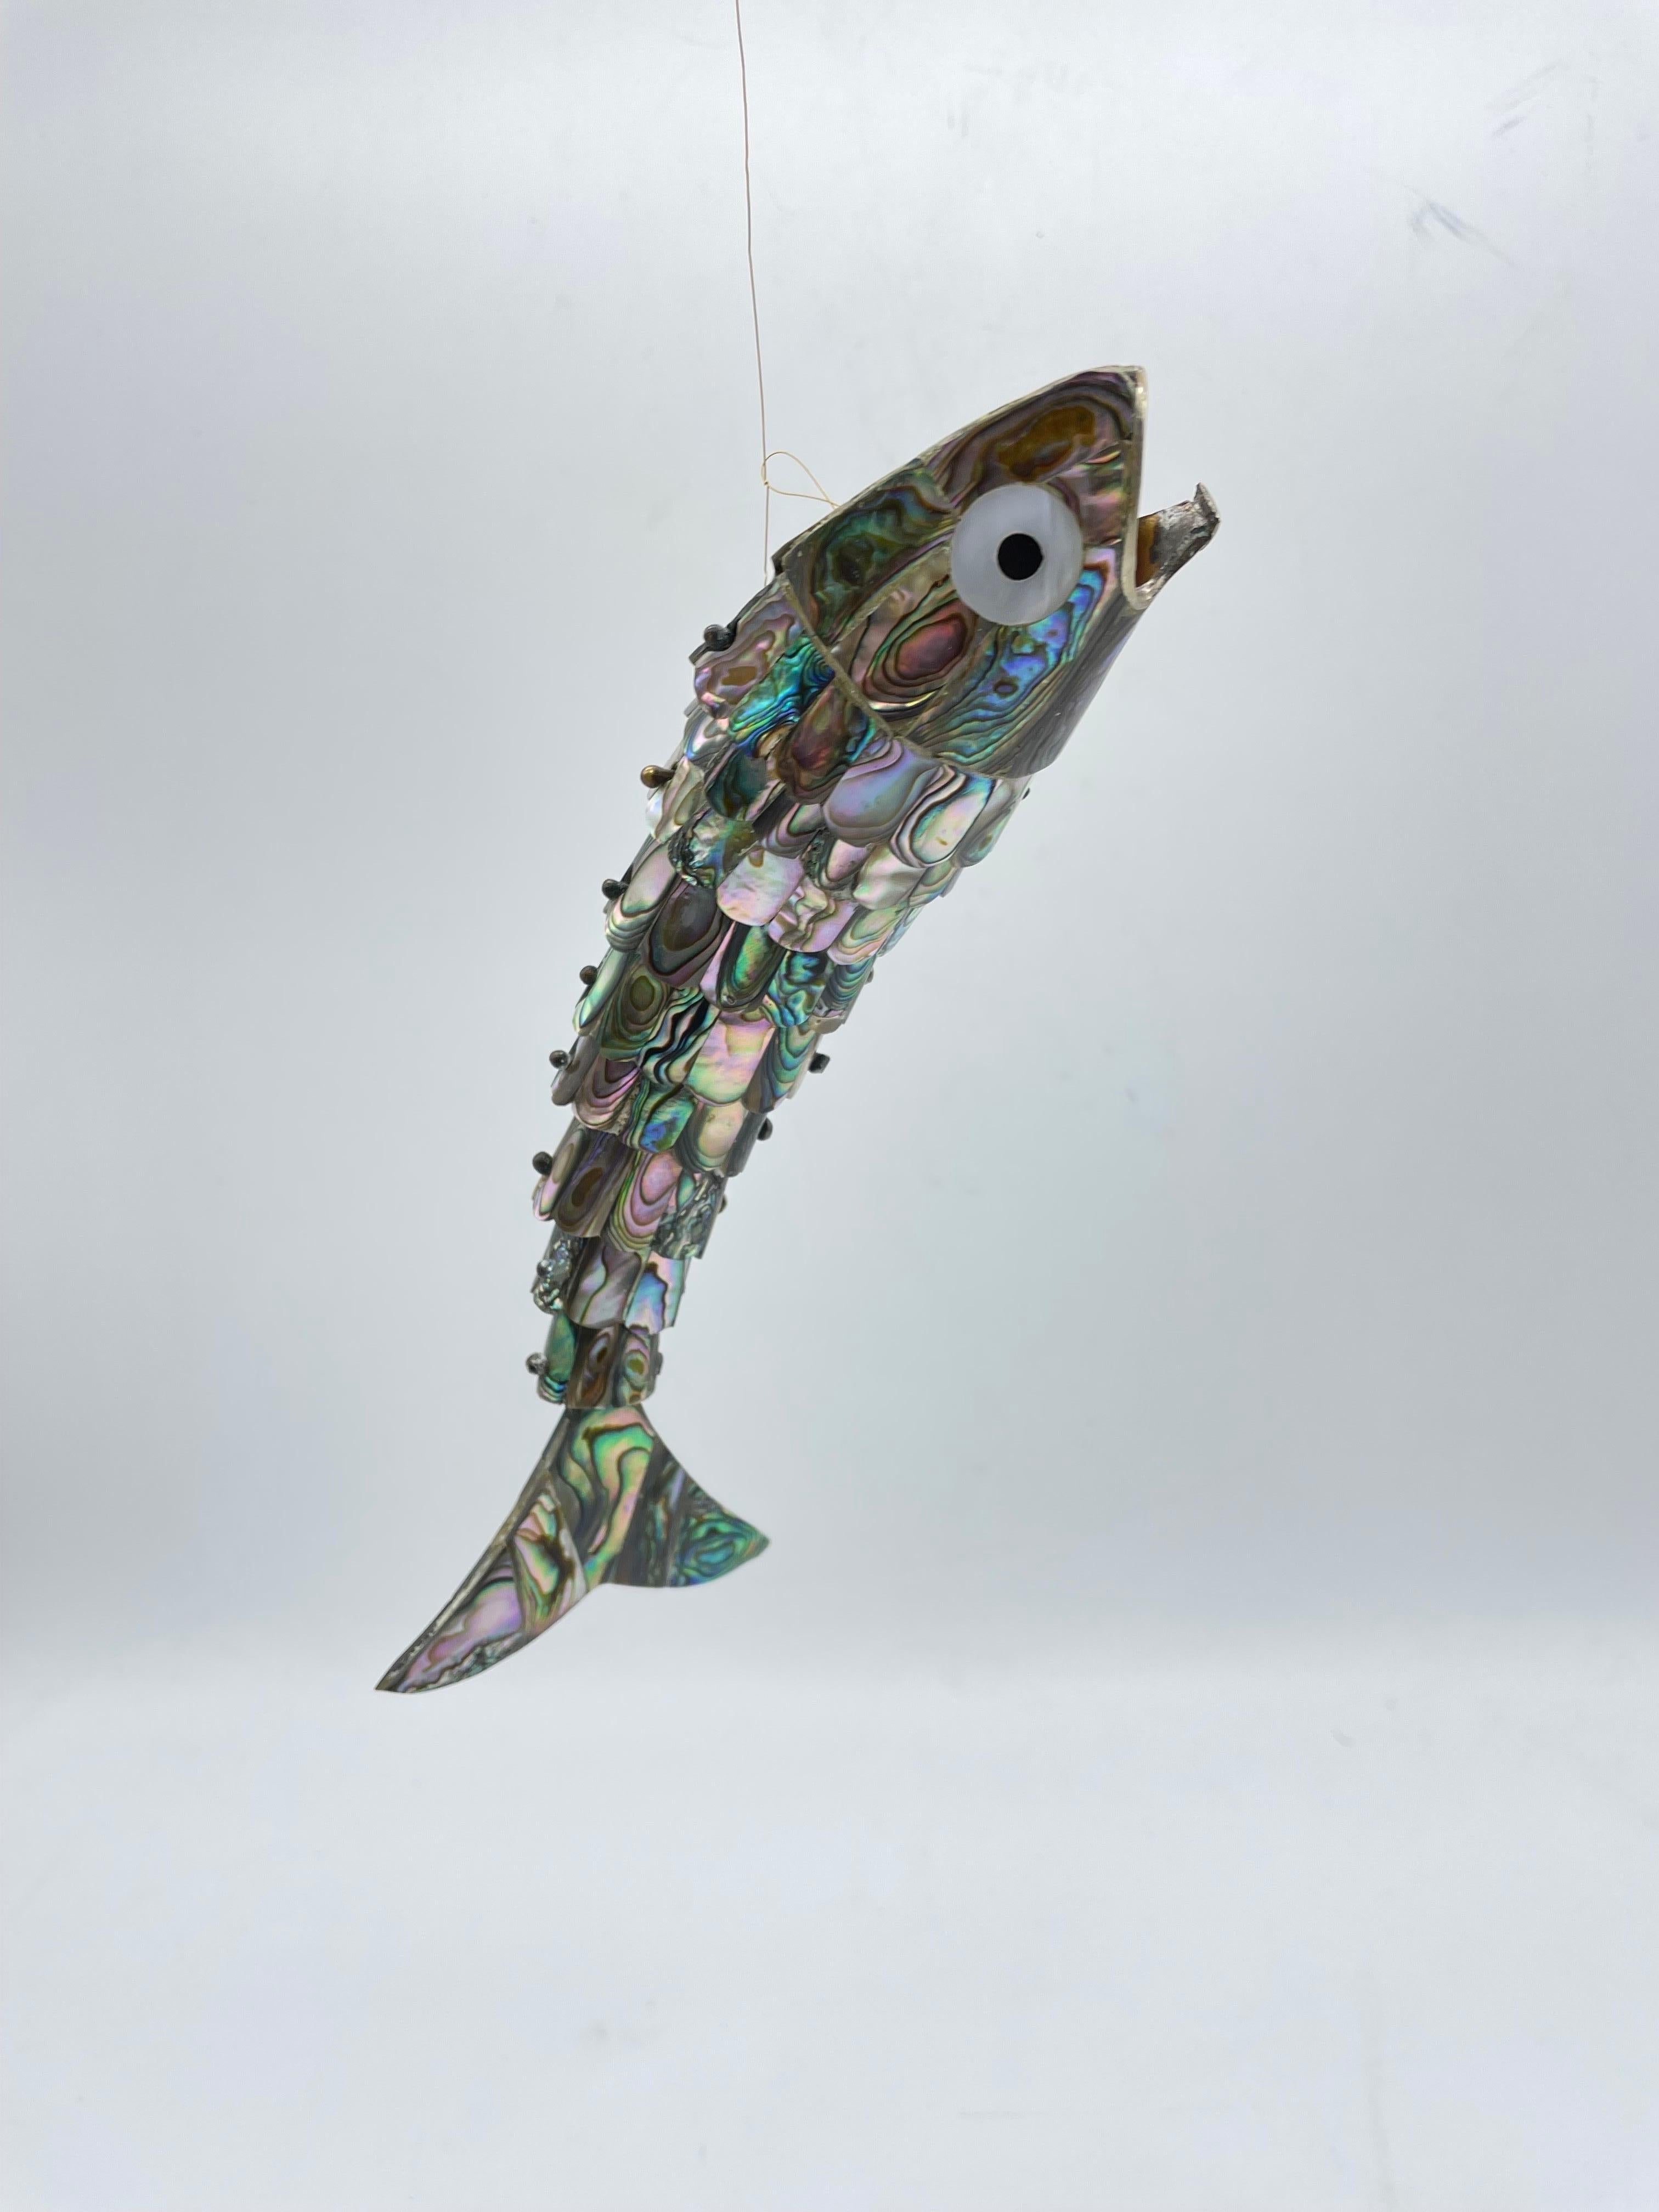 Curious wriggling fish made of mother-of-pearl

Fish made of mother of pearl veneer. Very fine and quality work. Fish assembled with moving elements.